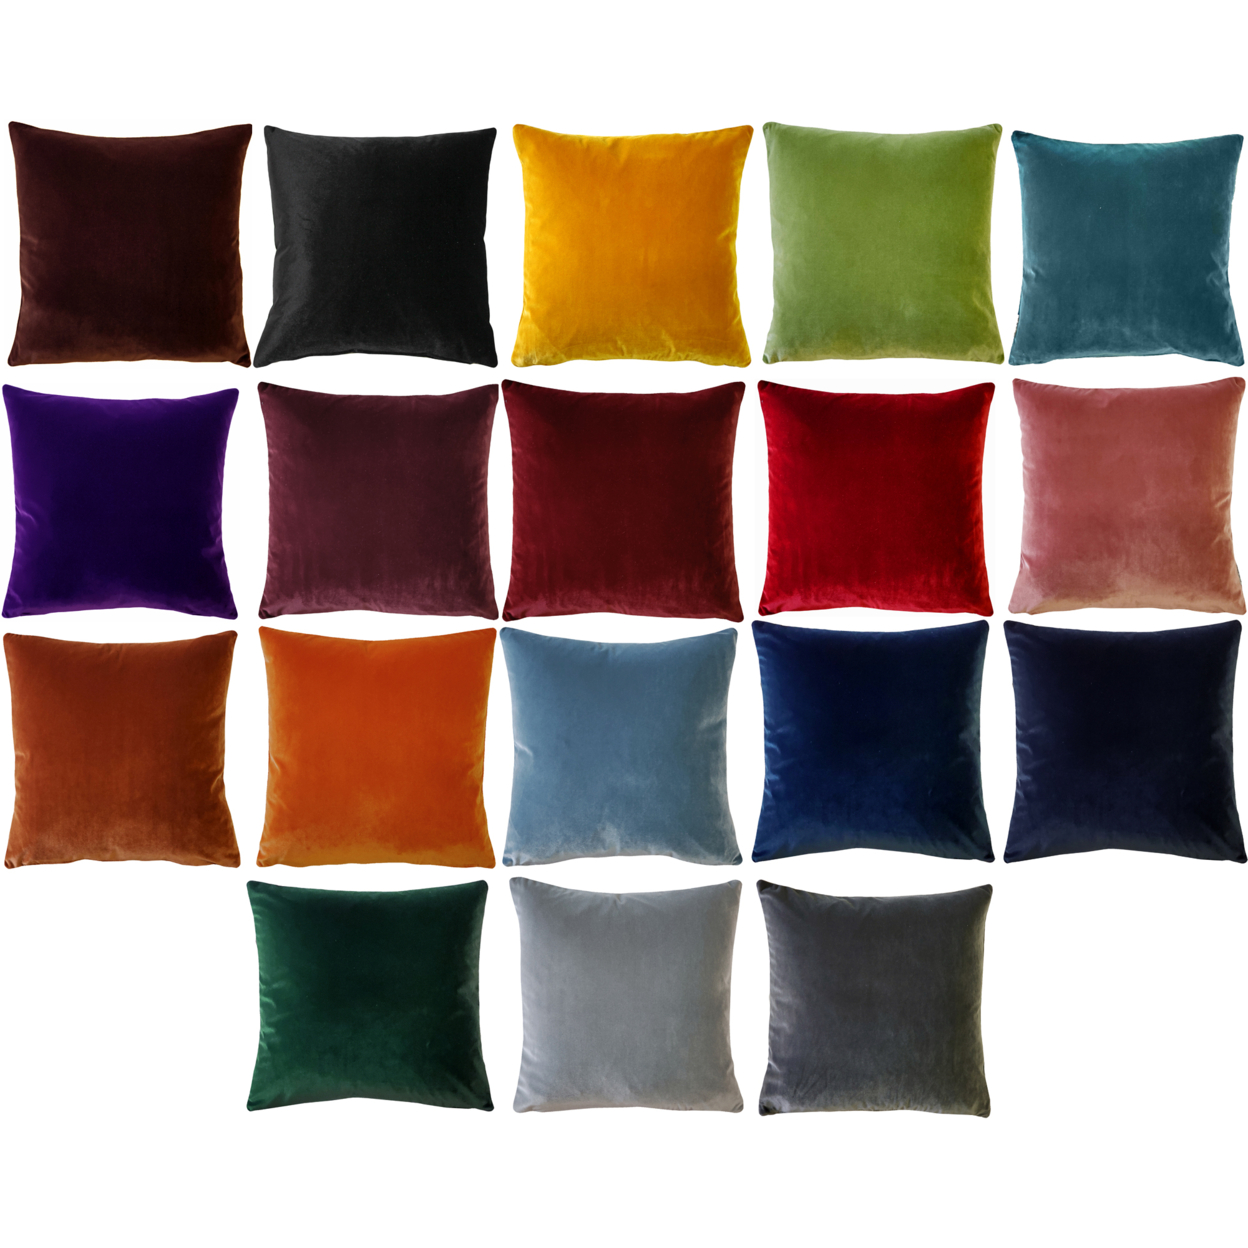 Castello Velvet Throw Pillows, Complete Pillow With Polyfill Pillow Insert (18 Colors, 3 Sizes) - Wine, 17x17